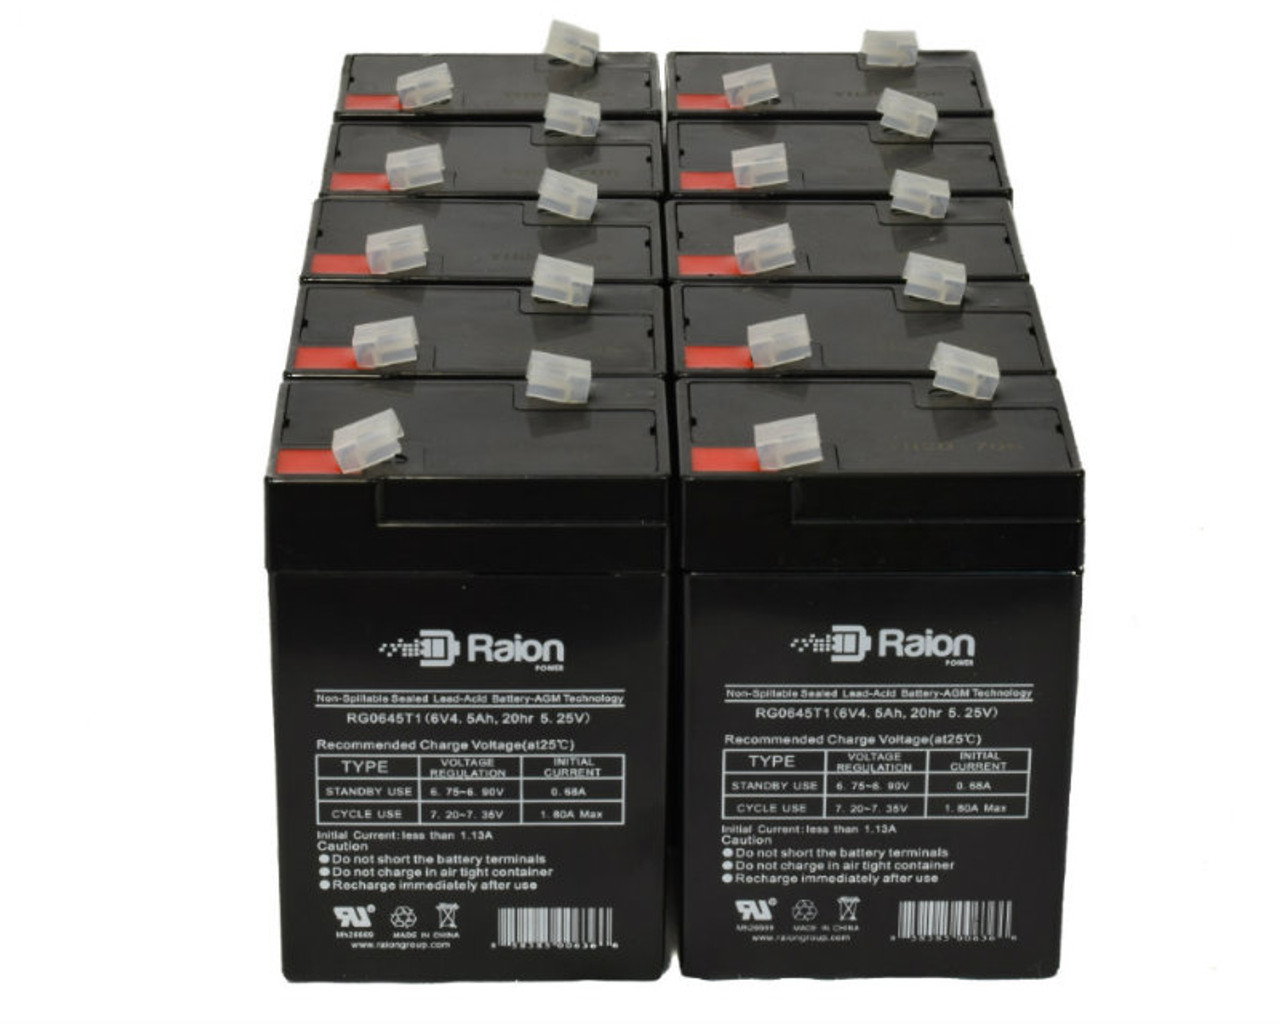 Raion Power RG0645T1 6V 4.5Ah Replacement Medical Equipment Battery for Philips A-1 BP Monitor - M3923A - 10 Pack